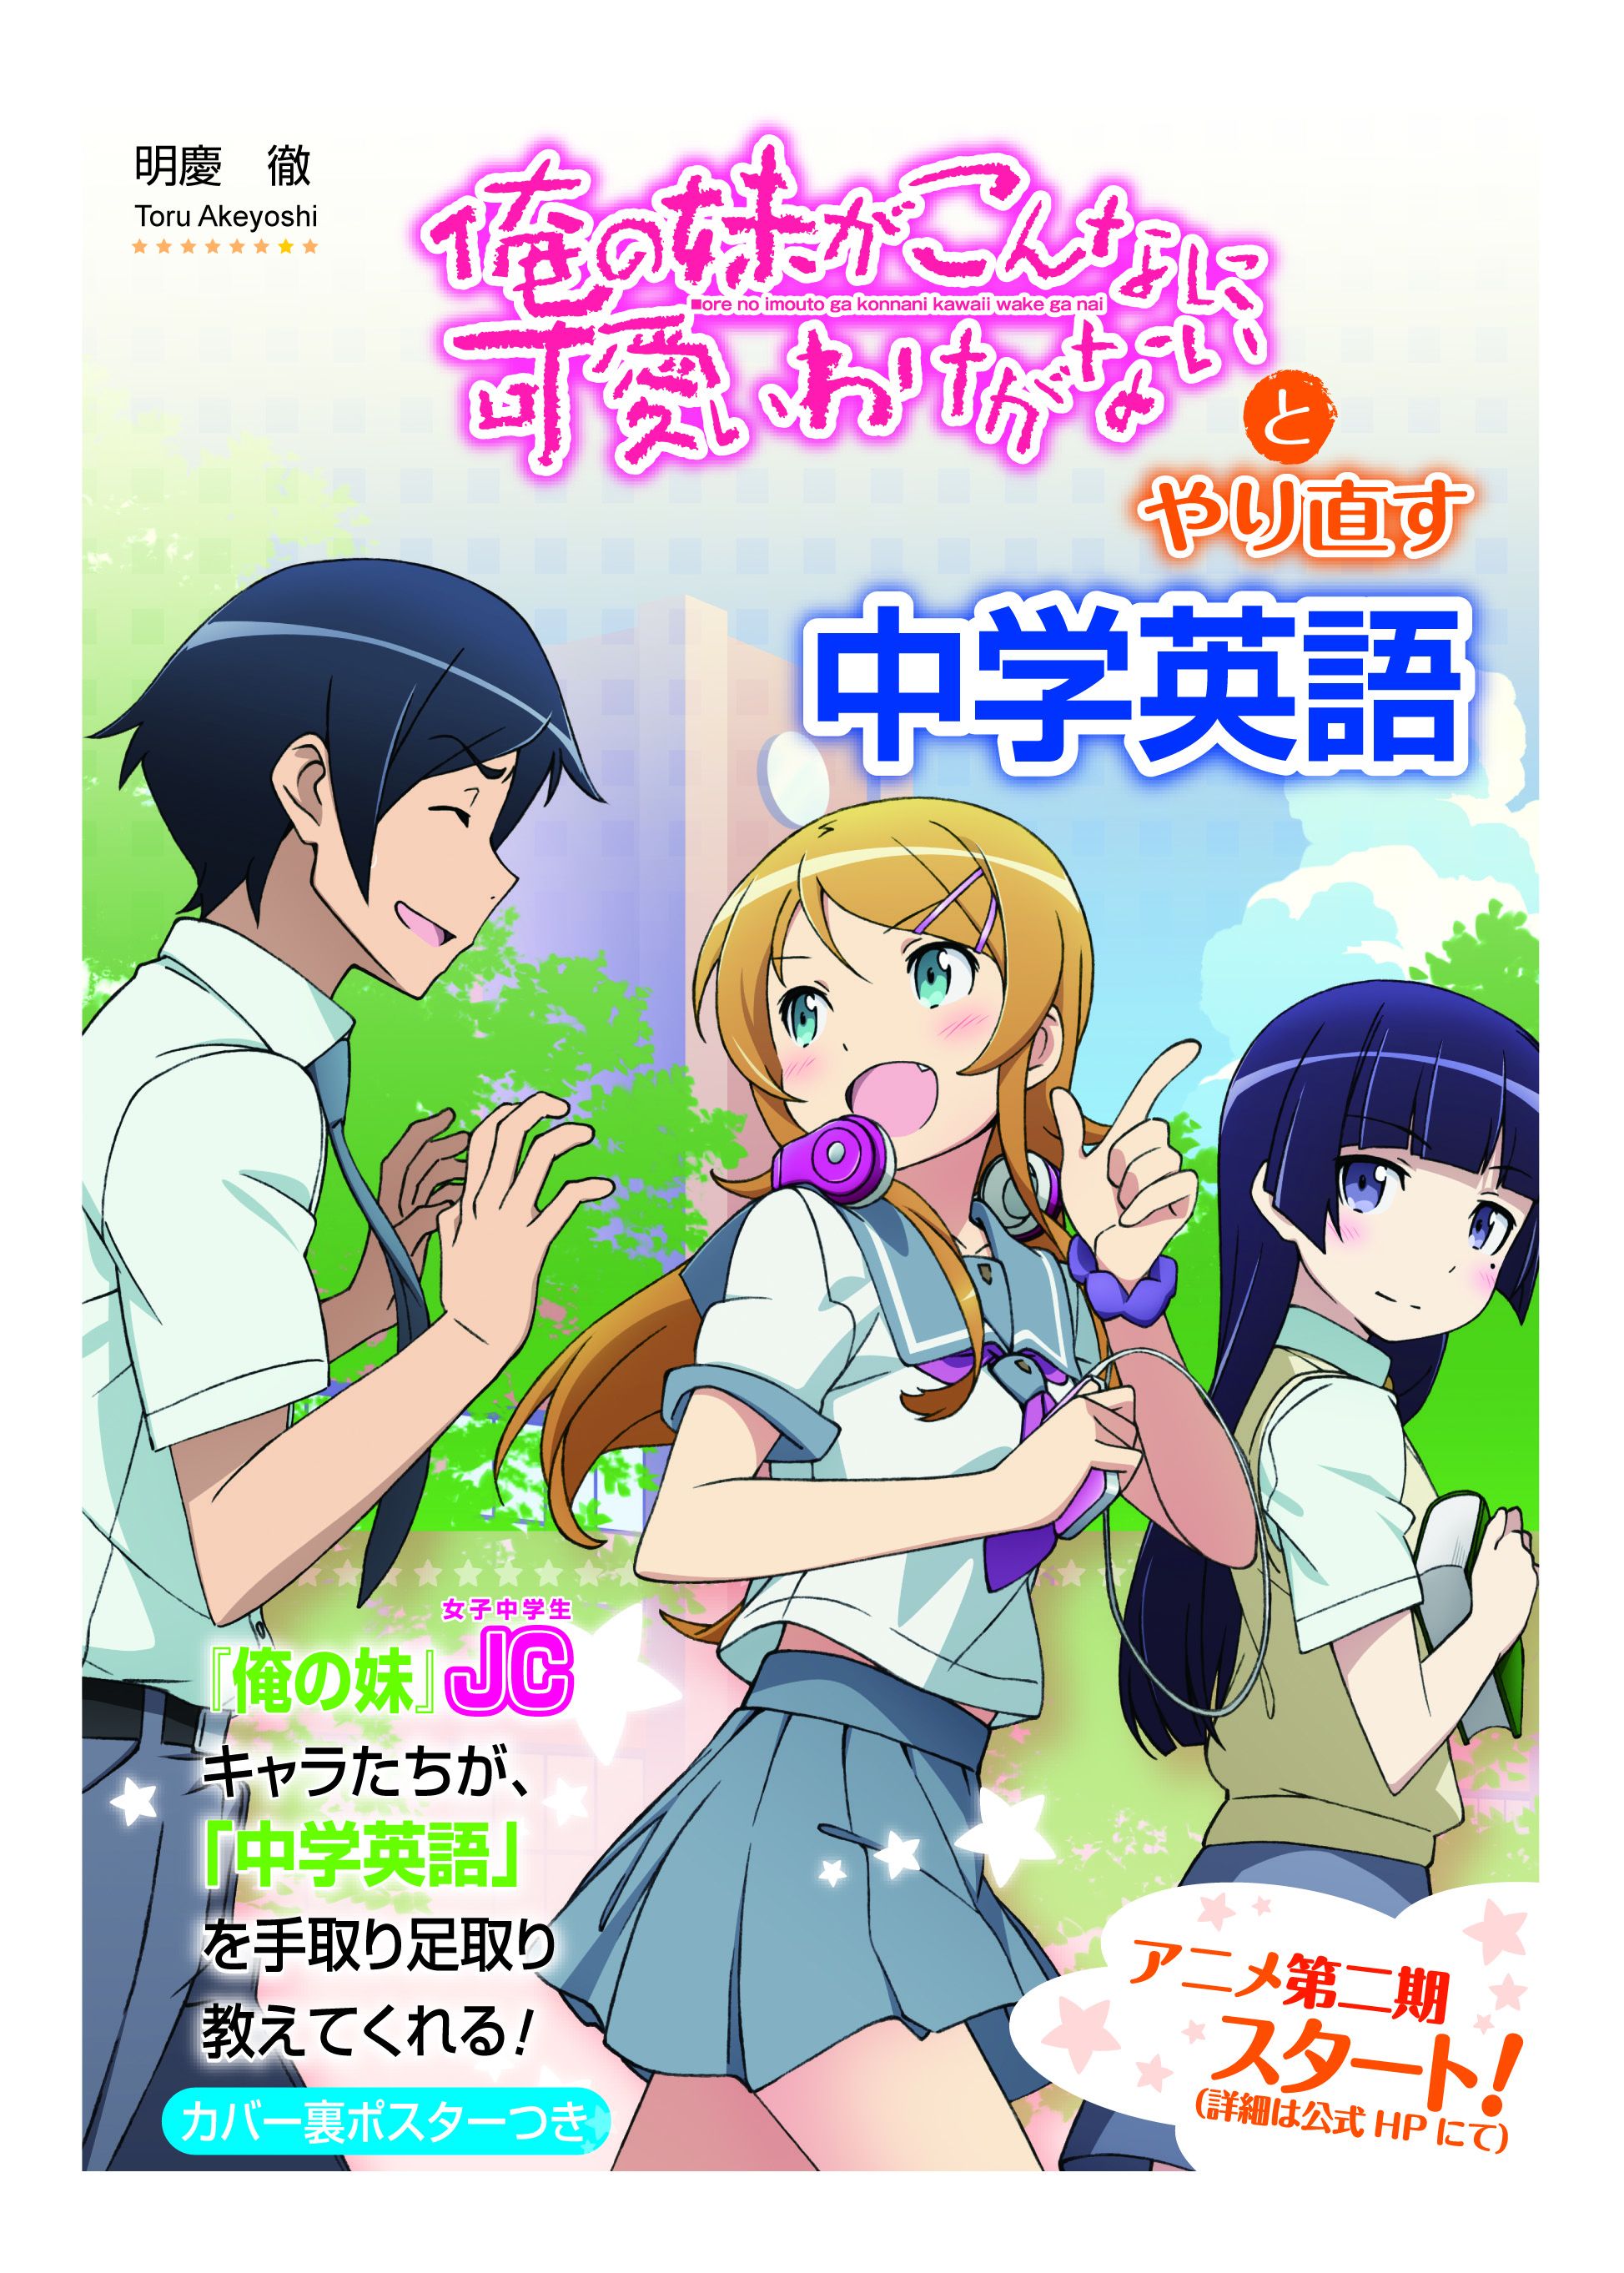 Little Sister - Oreimo English Textbook Coming! Learn Useful Phrases Like â€œMy Little Sister  Likes Porn Gamesâ€ | SoraNews24 -Japan News-